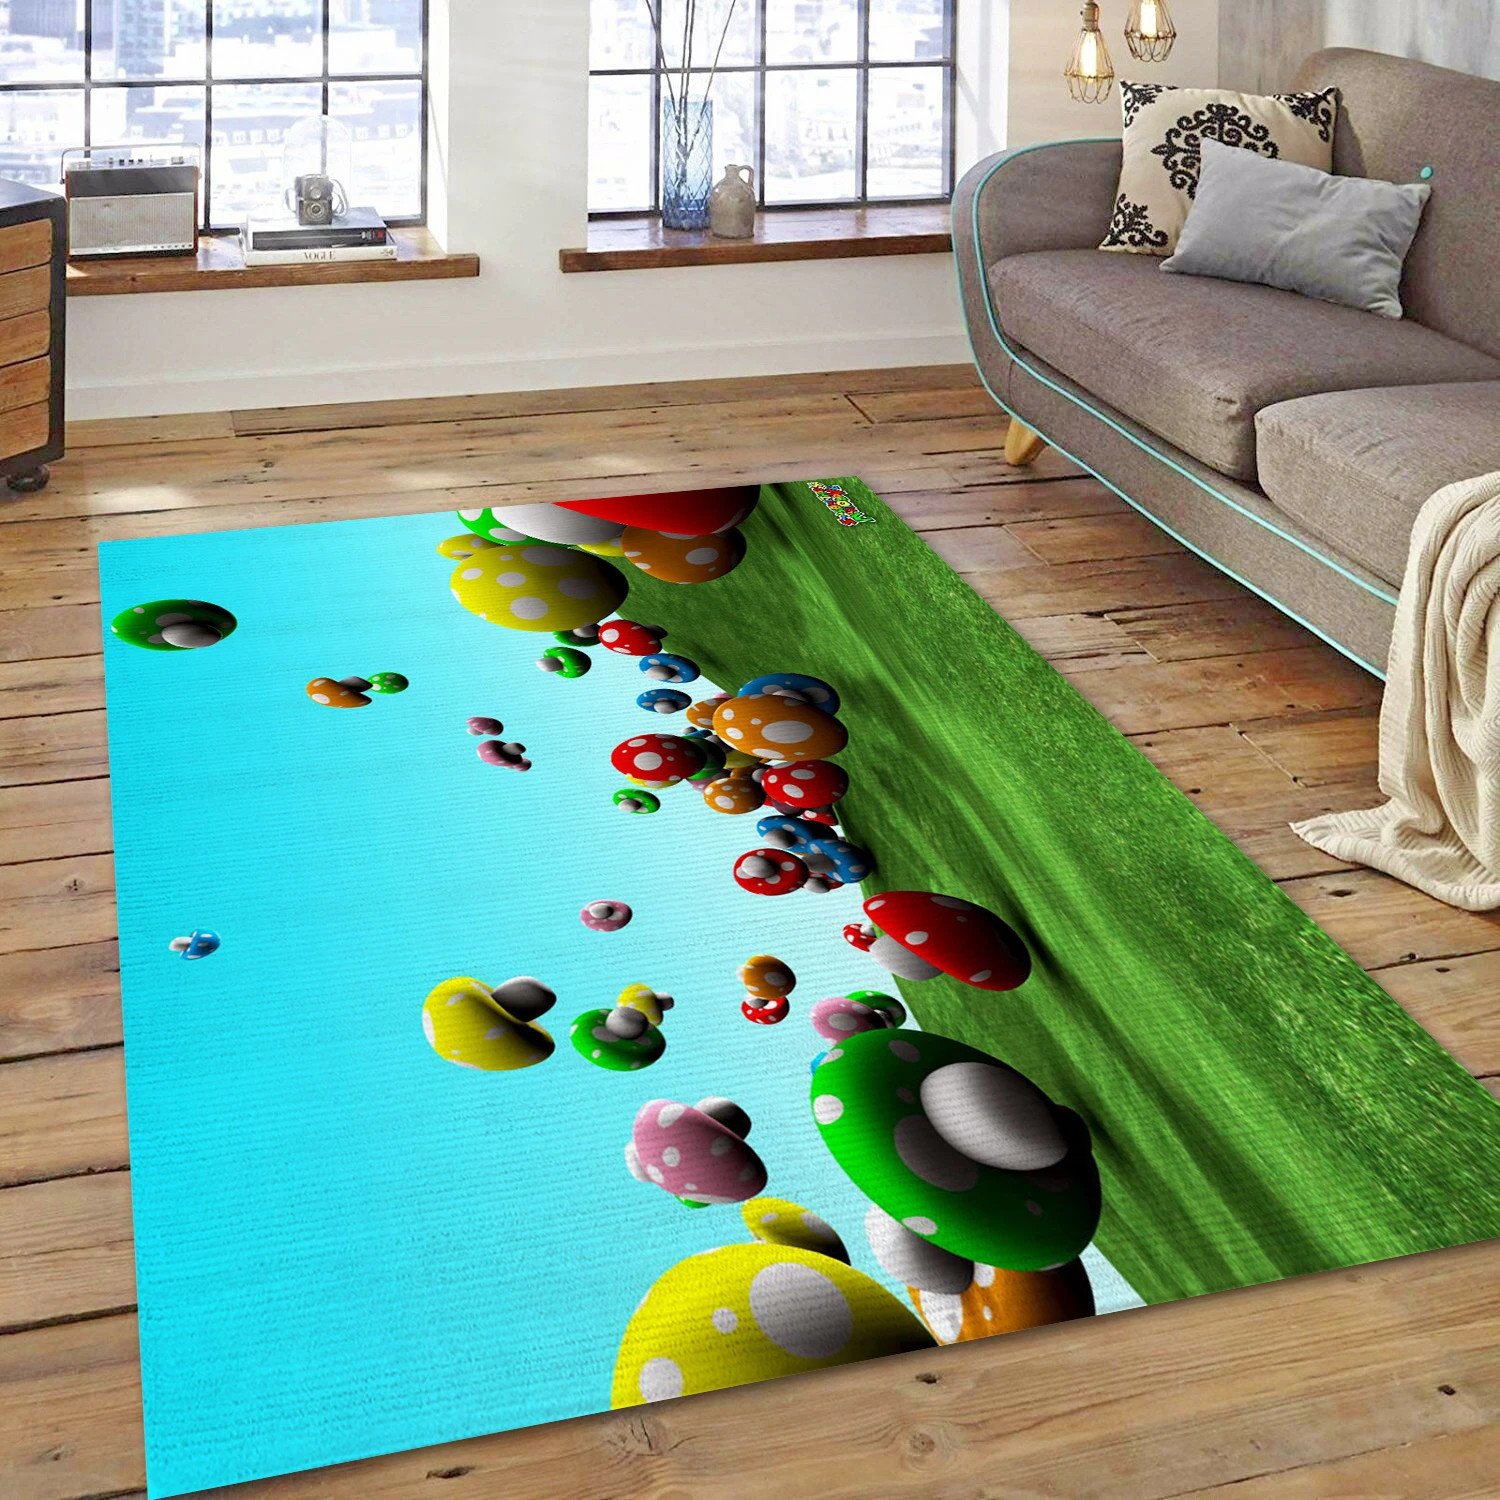 Mario Video Game Area Rug For Christmas, Bedroom Rug - Christmas Gift Decor - Indoor Outdoor Rugs 3